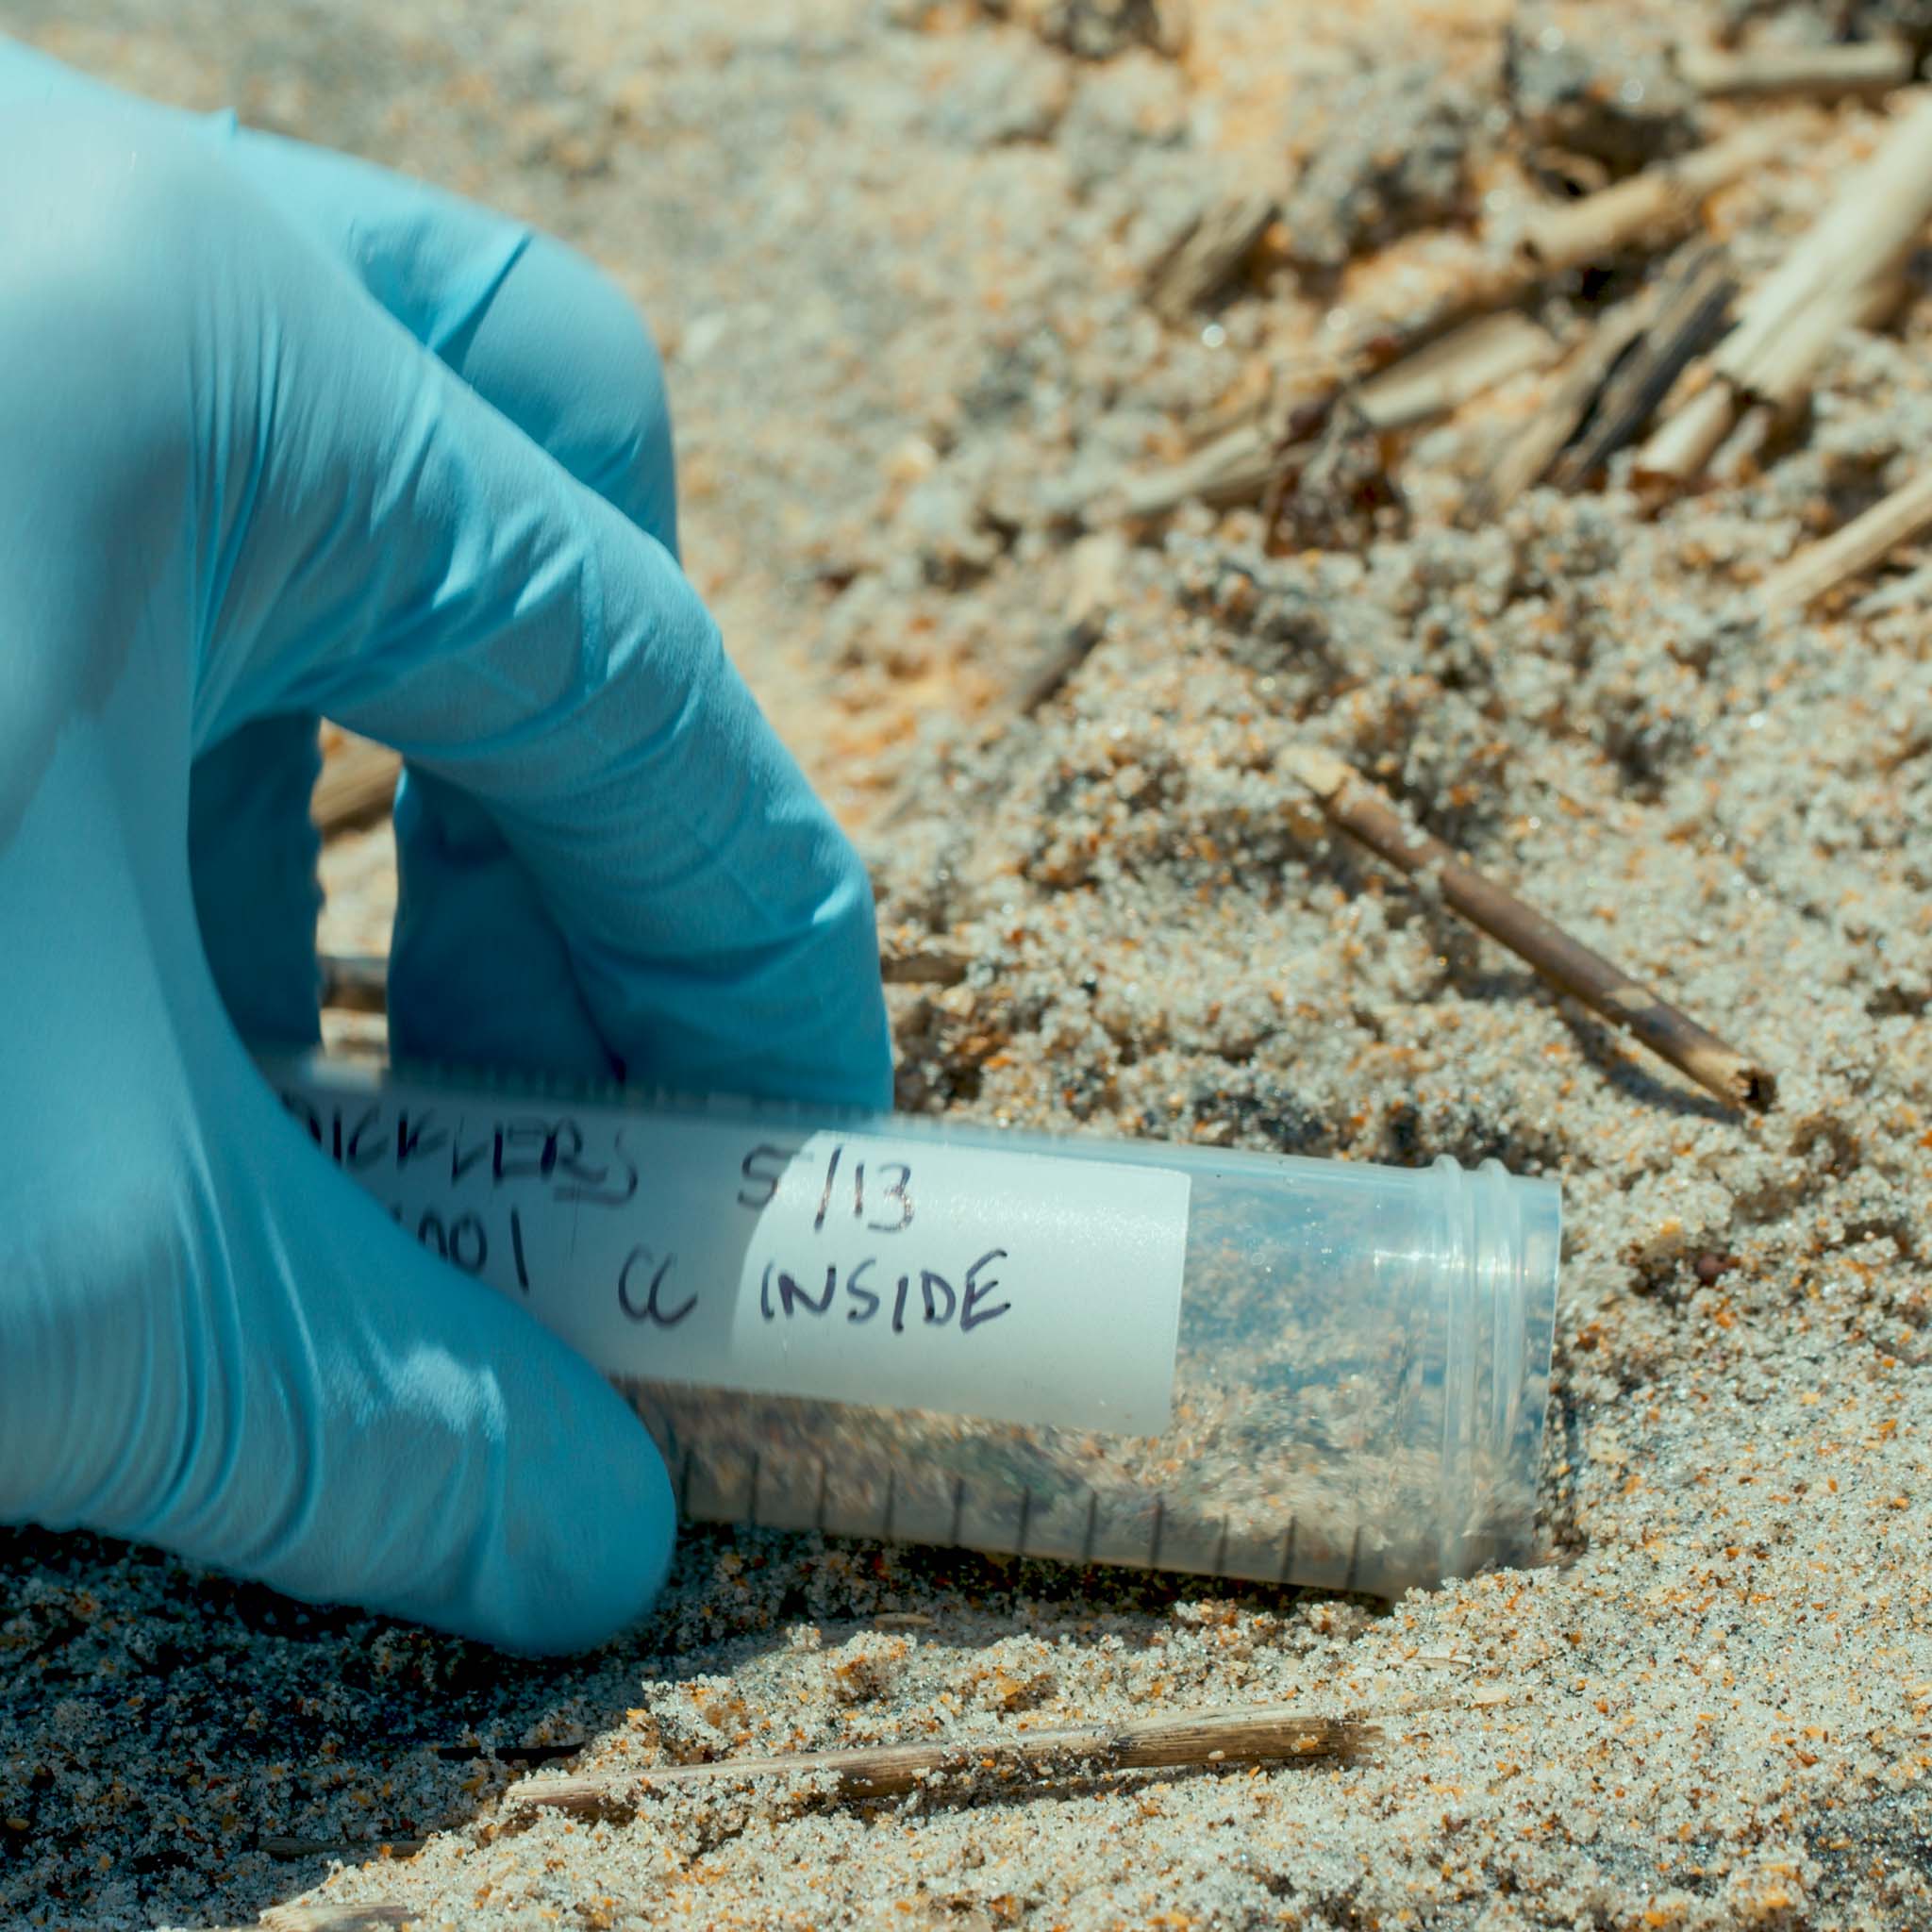 UF News Article: Sea turtle conservation gets boost from new DNA detection method